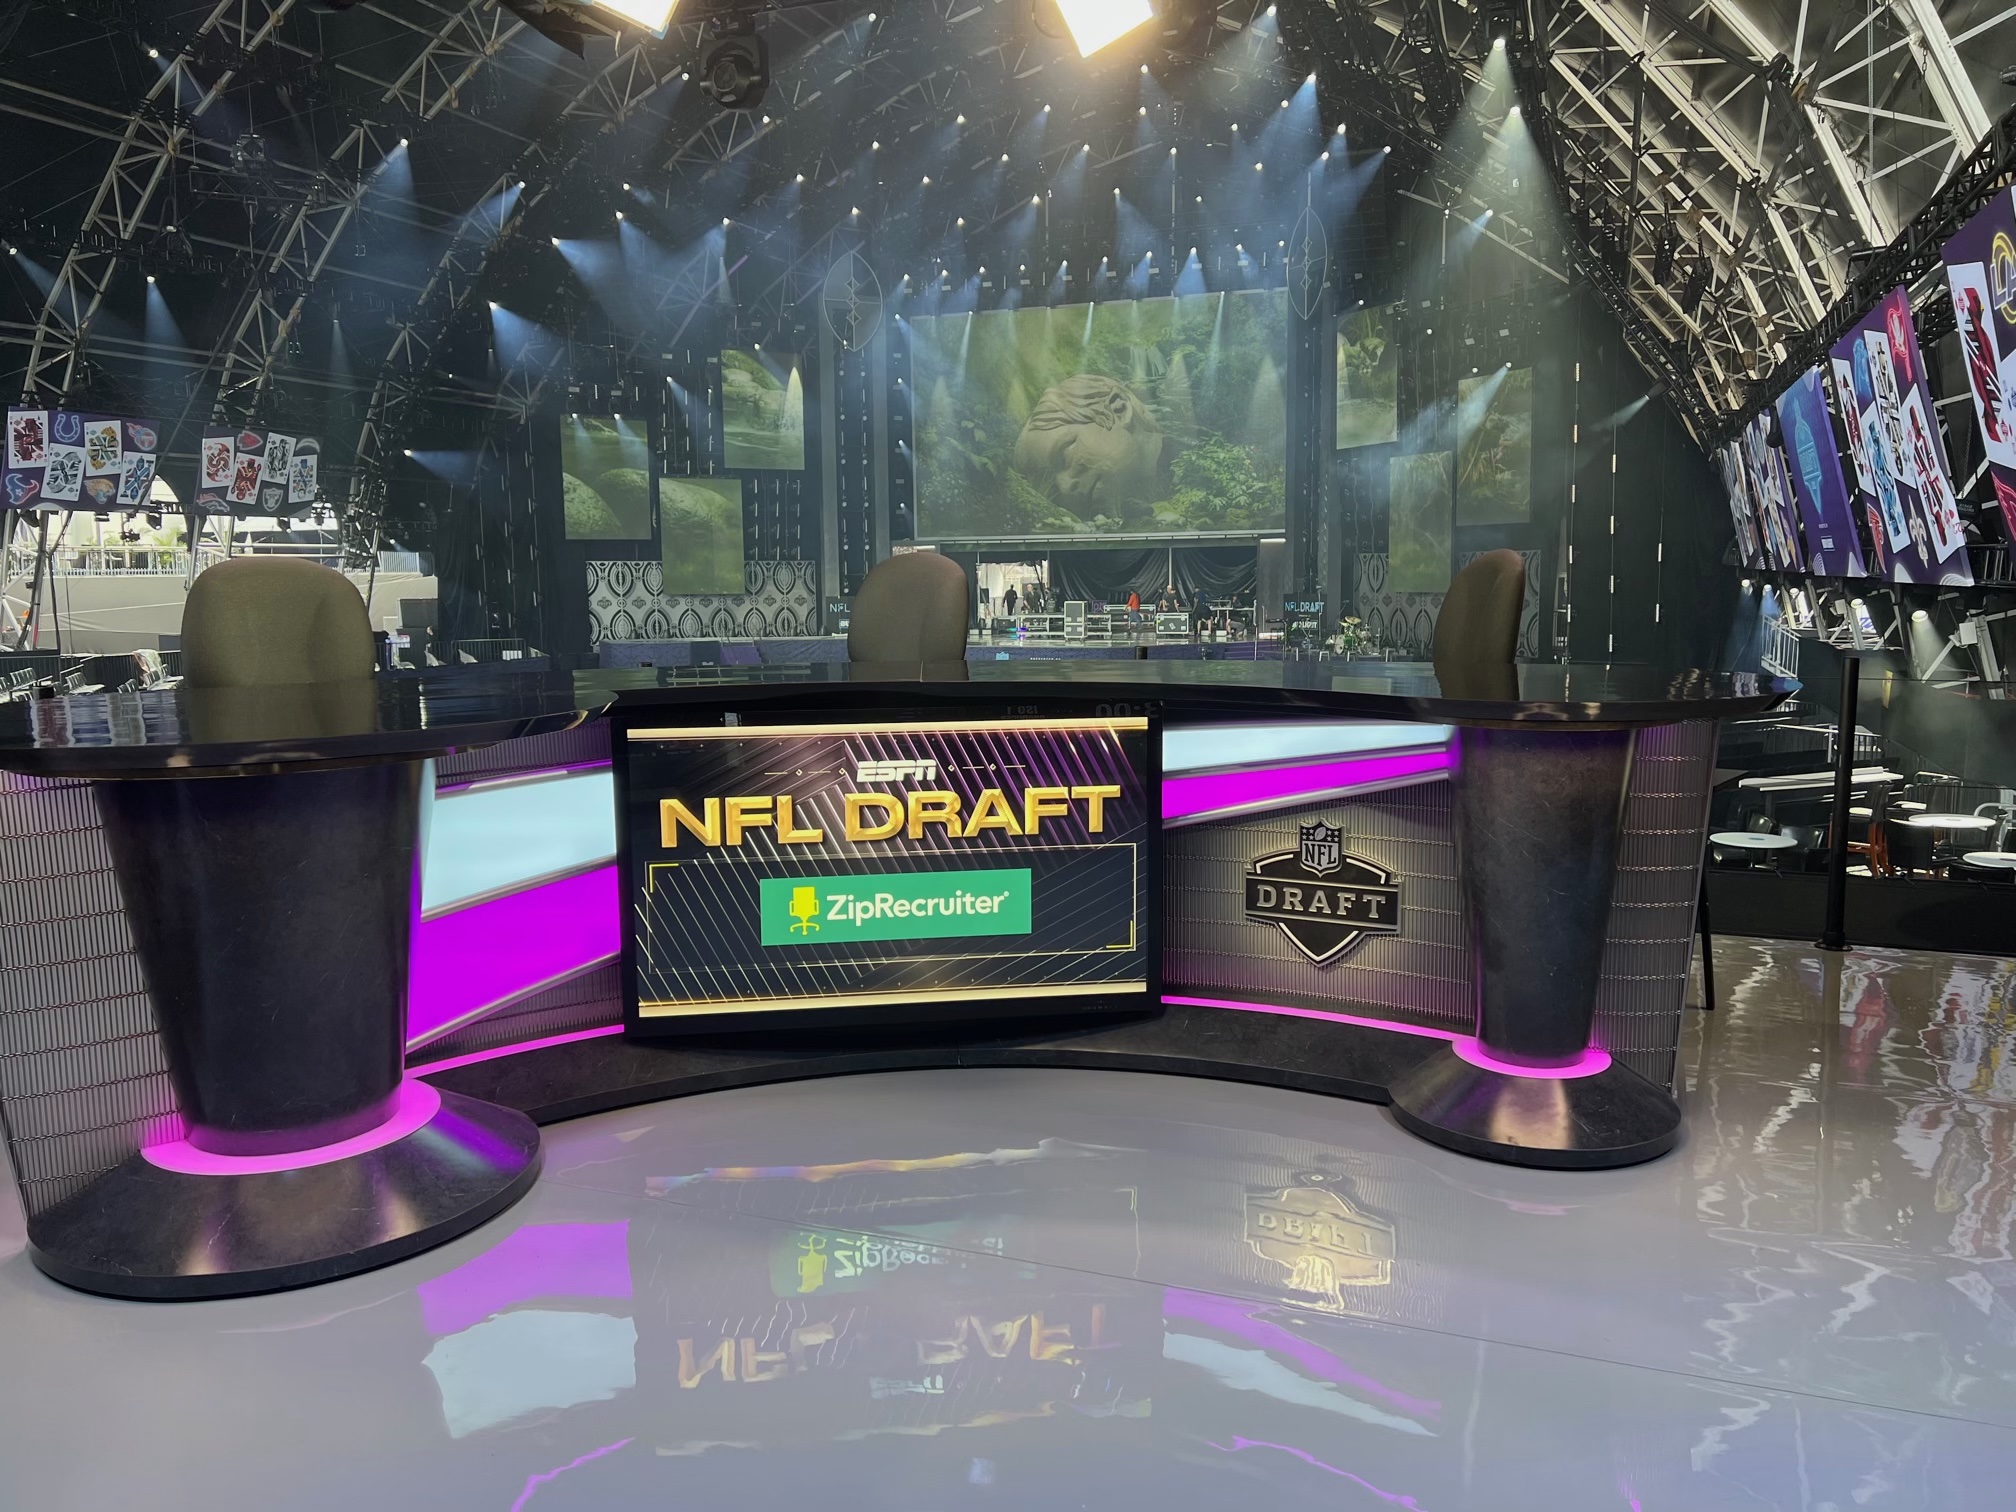 Live From 2022 NFL Draft: ESPN Goes All-In on Three-Day Party in Las Vegas